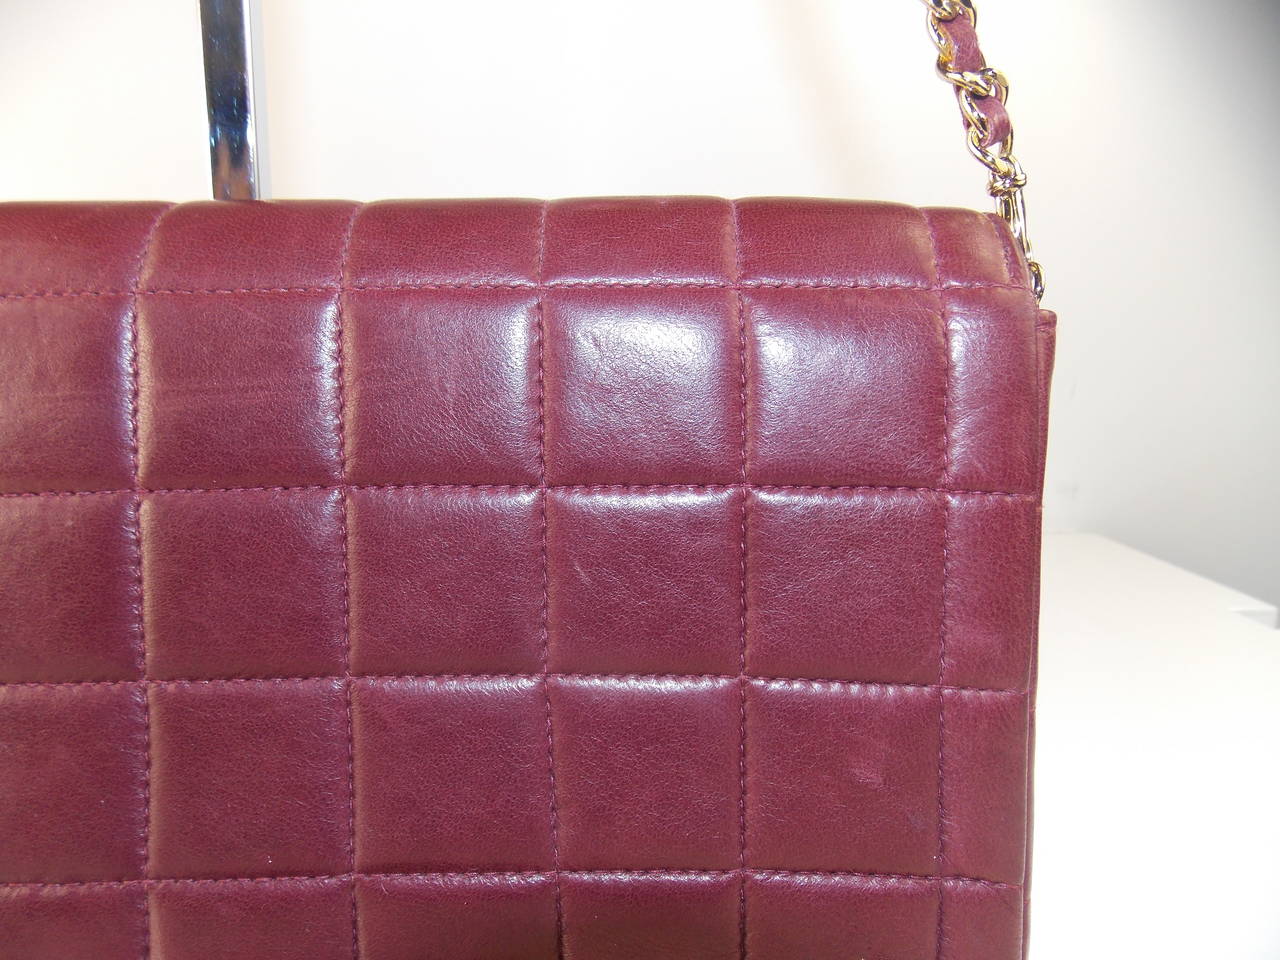 This exquisite bag features a CC gold button closure, a chain strap, two inner pockets, lambskin burgundy leather quilted in signature Chanel square stitched pattern.  